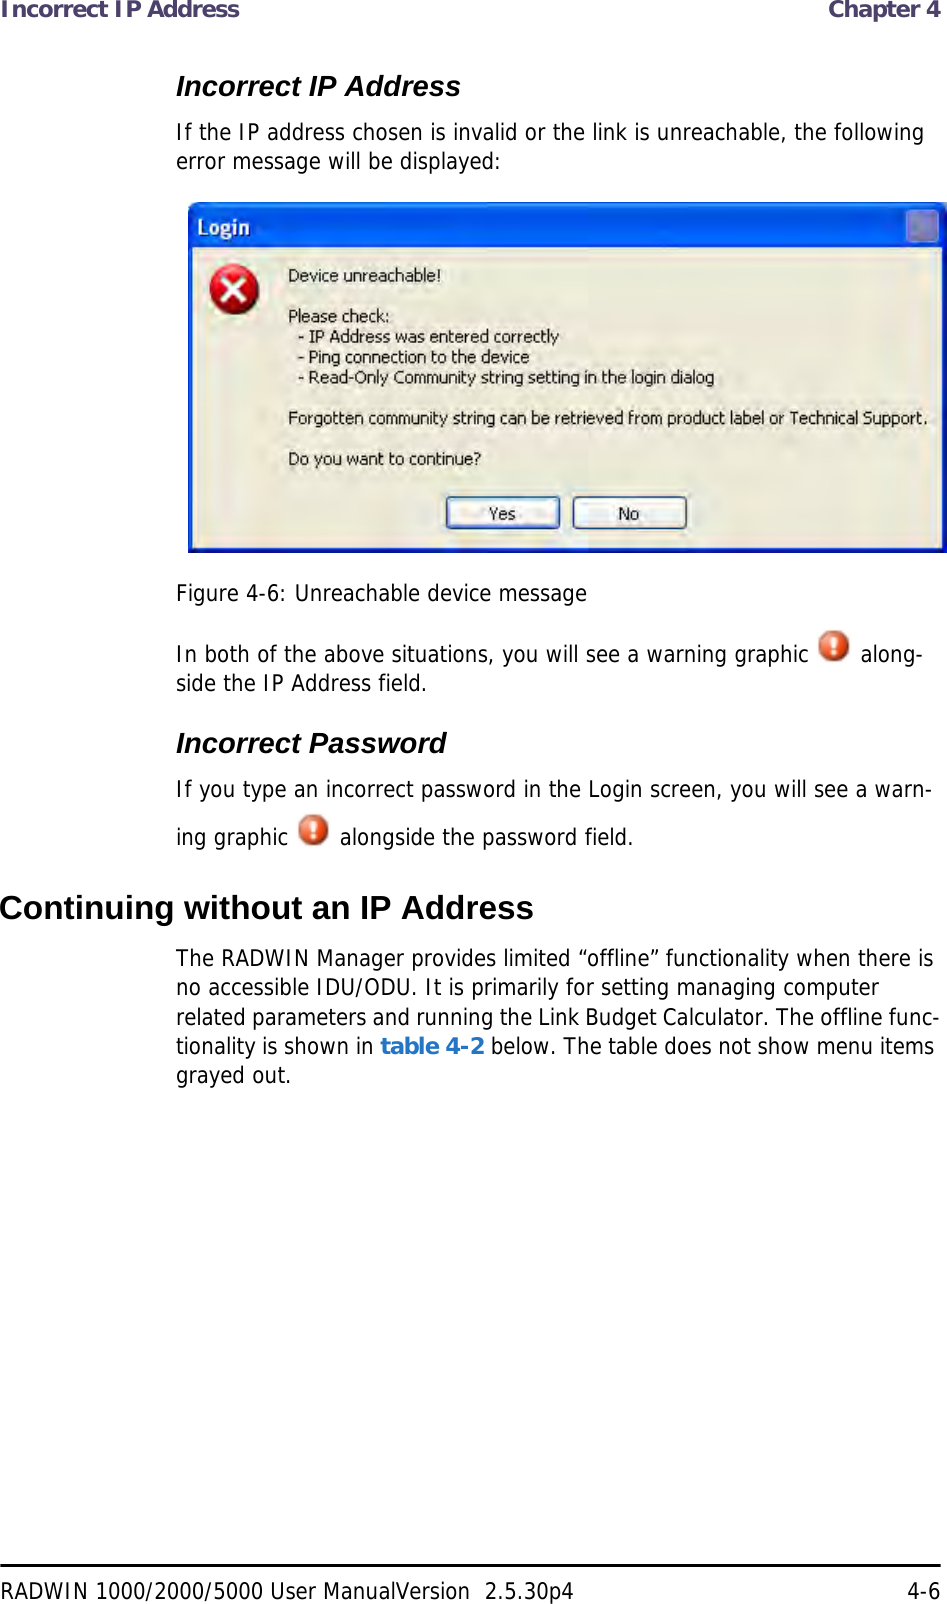 Incorrect IP Address  Chapter 4RADWIN 1000/2000/5000 User ManualVersion  2.5.30p4 4-6Incorrect IP AddressIf the IP address chosen is invalid or the link is unreachable, the following error message will be displayed:Figure 4-6: Unreachable device messageIn both of the above situations, you will see a warning graphic   along-side the IP Address field.Incorrect PasswordIf you type an incorrect password in the Login screen, you will see a warn-ing graphic   alongside the password field.Continuing without an IP AddressThe RADWIN Manager provides limited “offline” functionality when there is no accessible IDU/ODU. It is primarily for setting managing computer related parameters and running the Link Budget Calculator. The offline func-tionality is shown in table 4-2 below. The table does not show menu items grayed out.